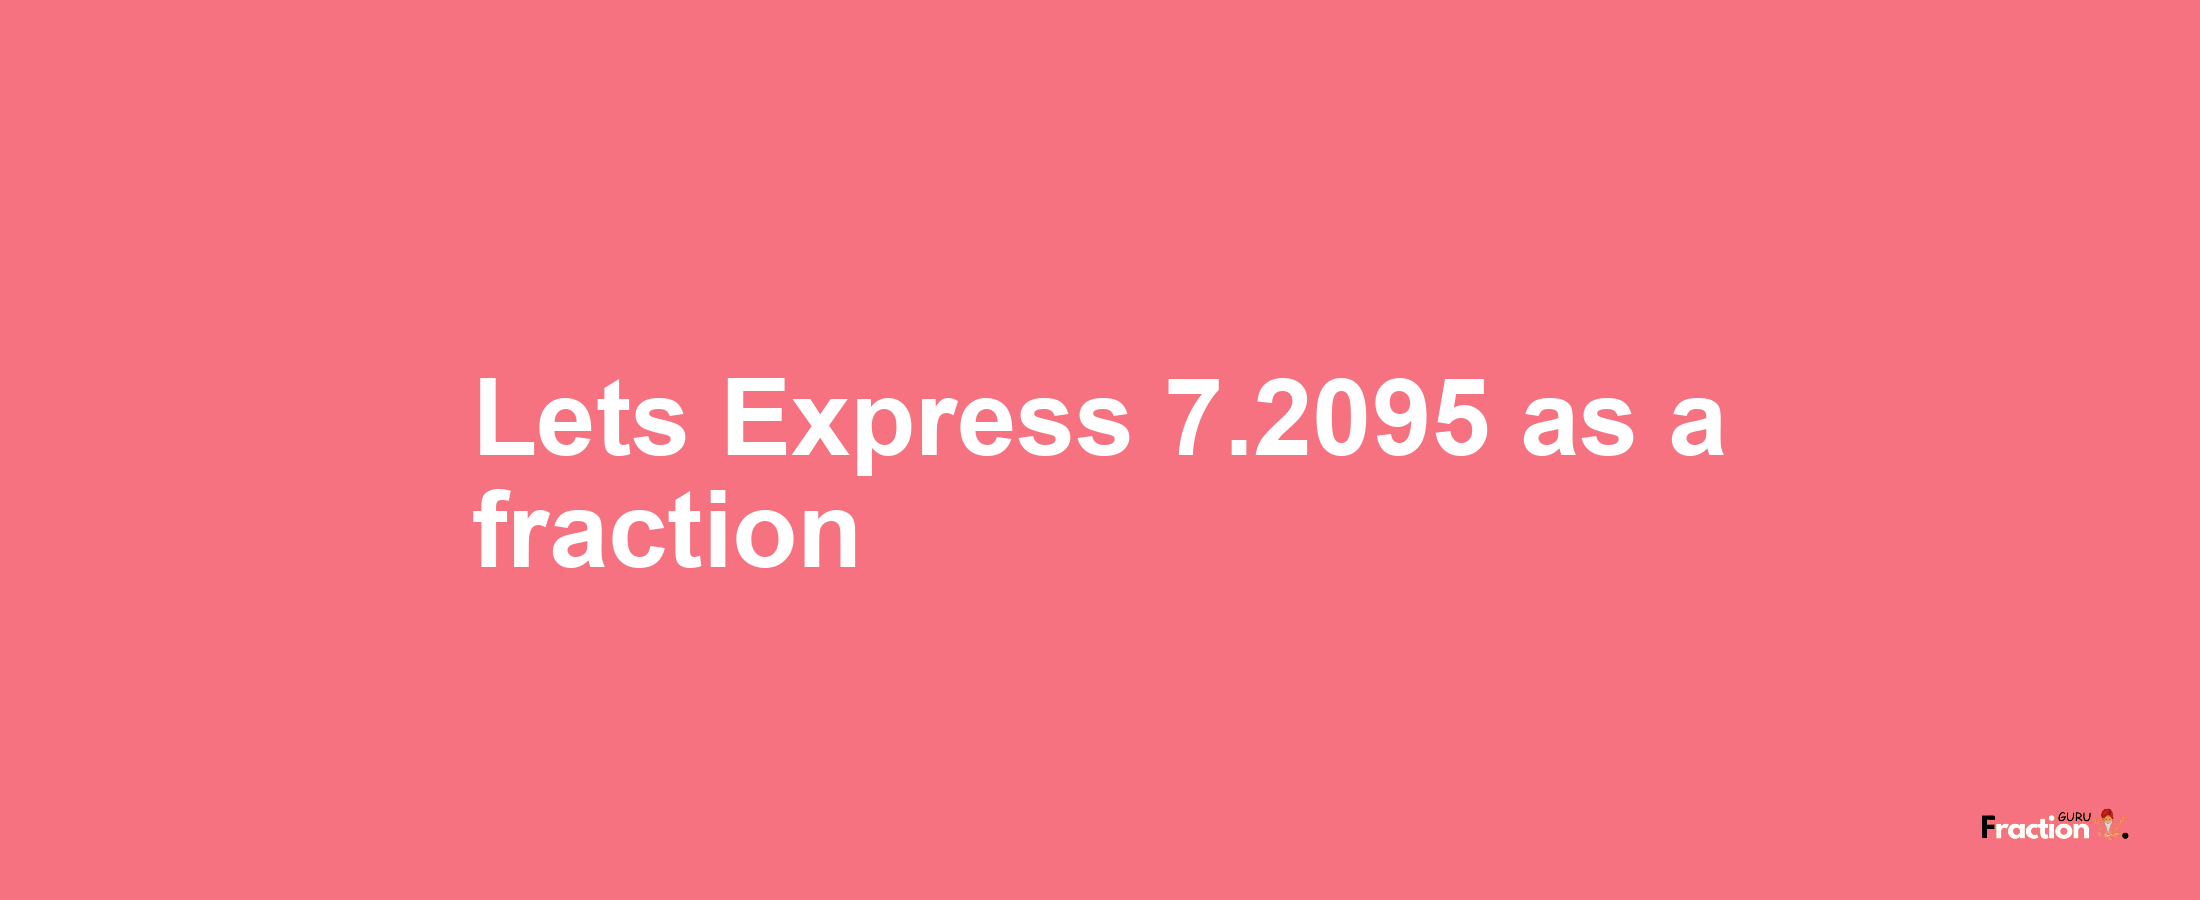 Lets Express 7.2095 as afraction